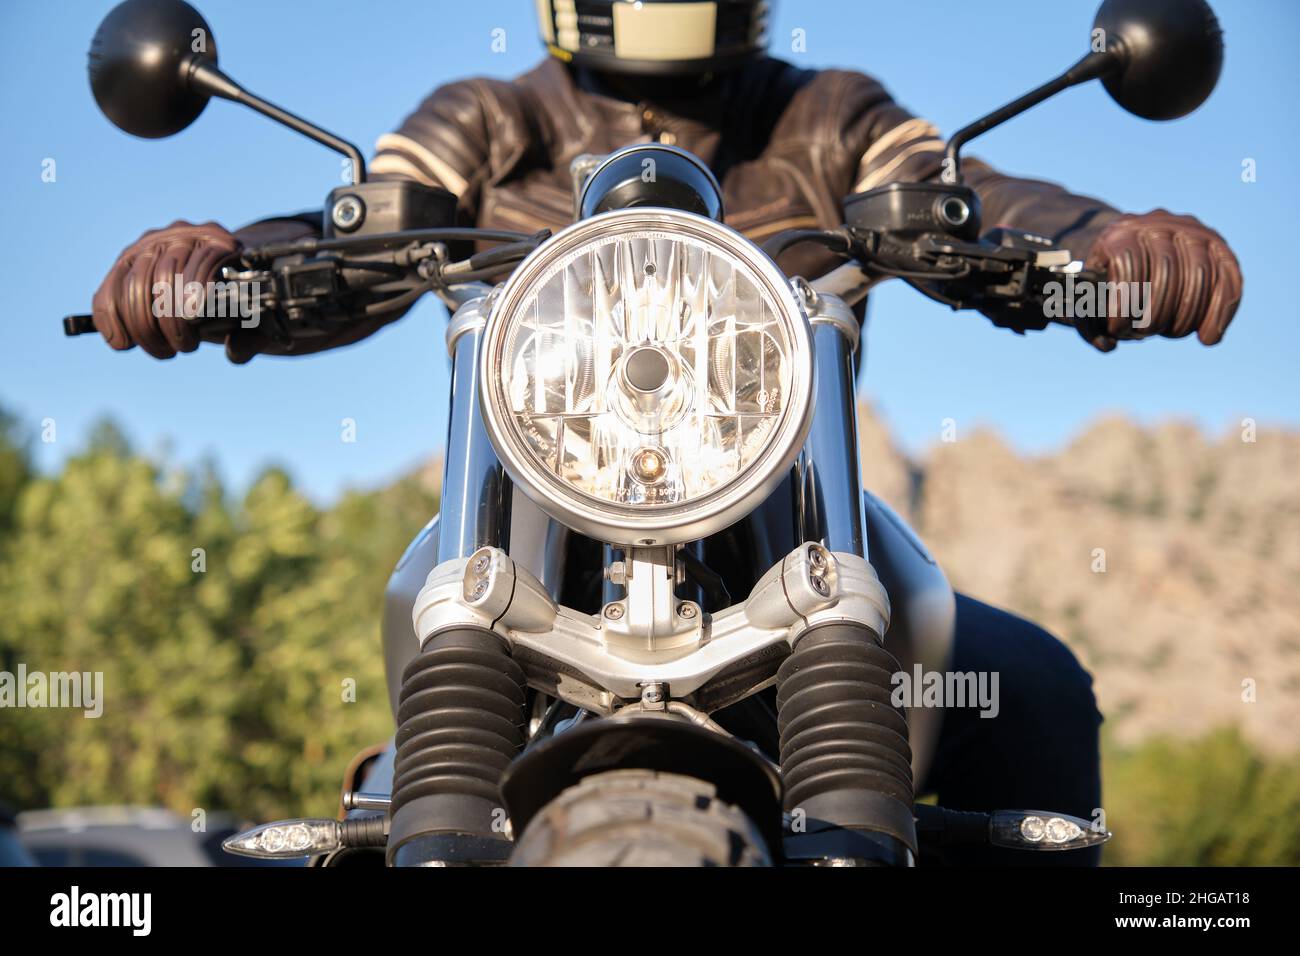 Motorcycle with headlight on and unrecognizable person Stock Photo